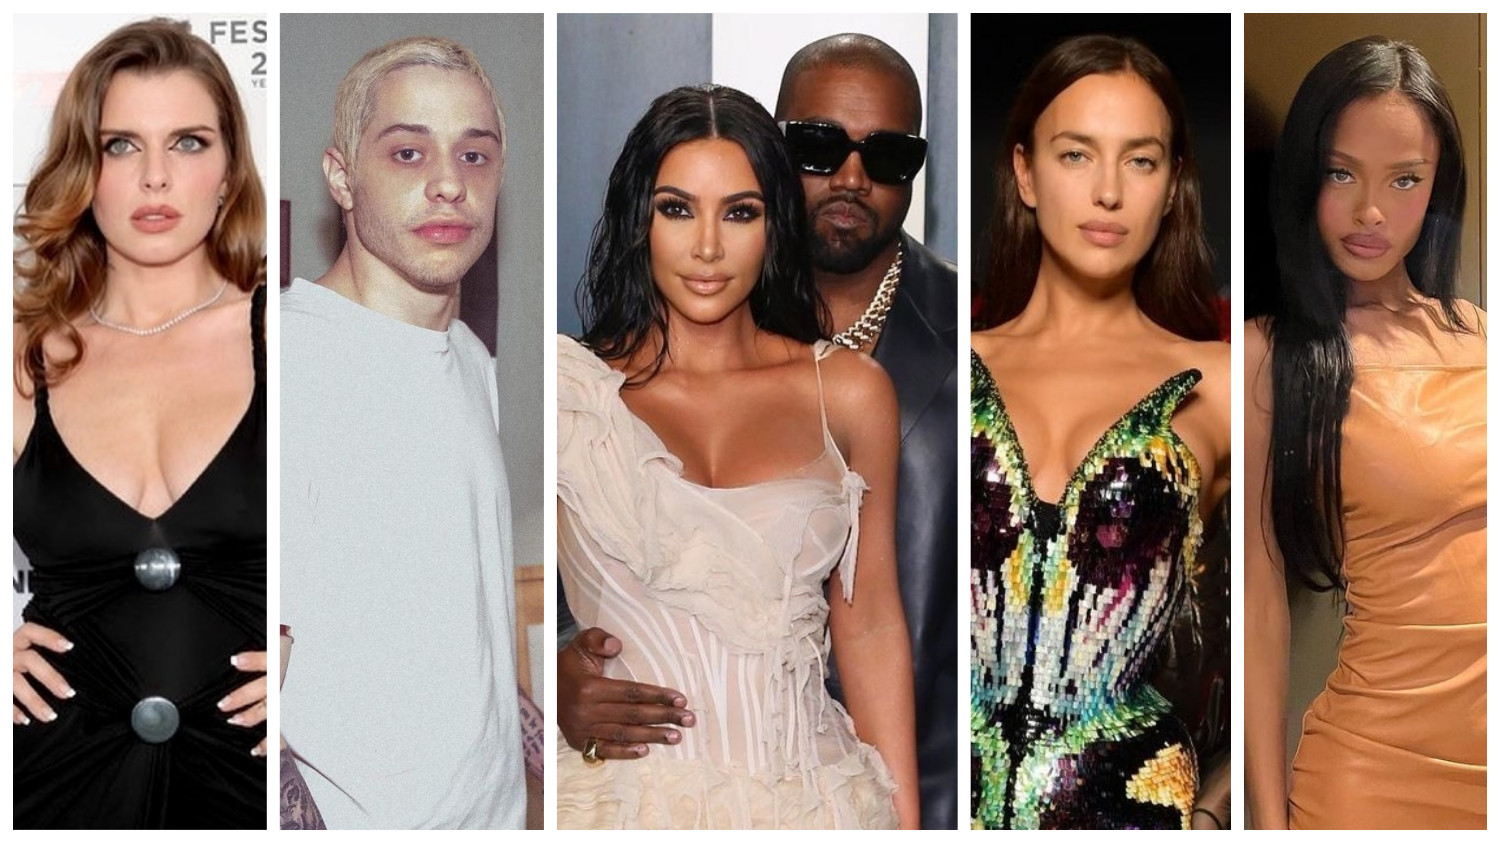 Since Kim Kardashian and Kanye West’s split, they’ve respectively been spotted with celebs Julia Fox, Pete Davidson, Irina Shayk and Vinetria. Photos: @juliafox, @petedaveidson, @kimkardashian,  @irinashayk, @vinetrria/Instagram,